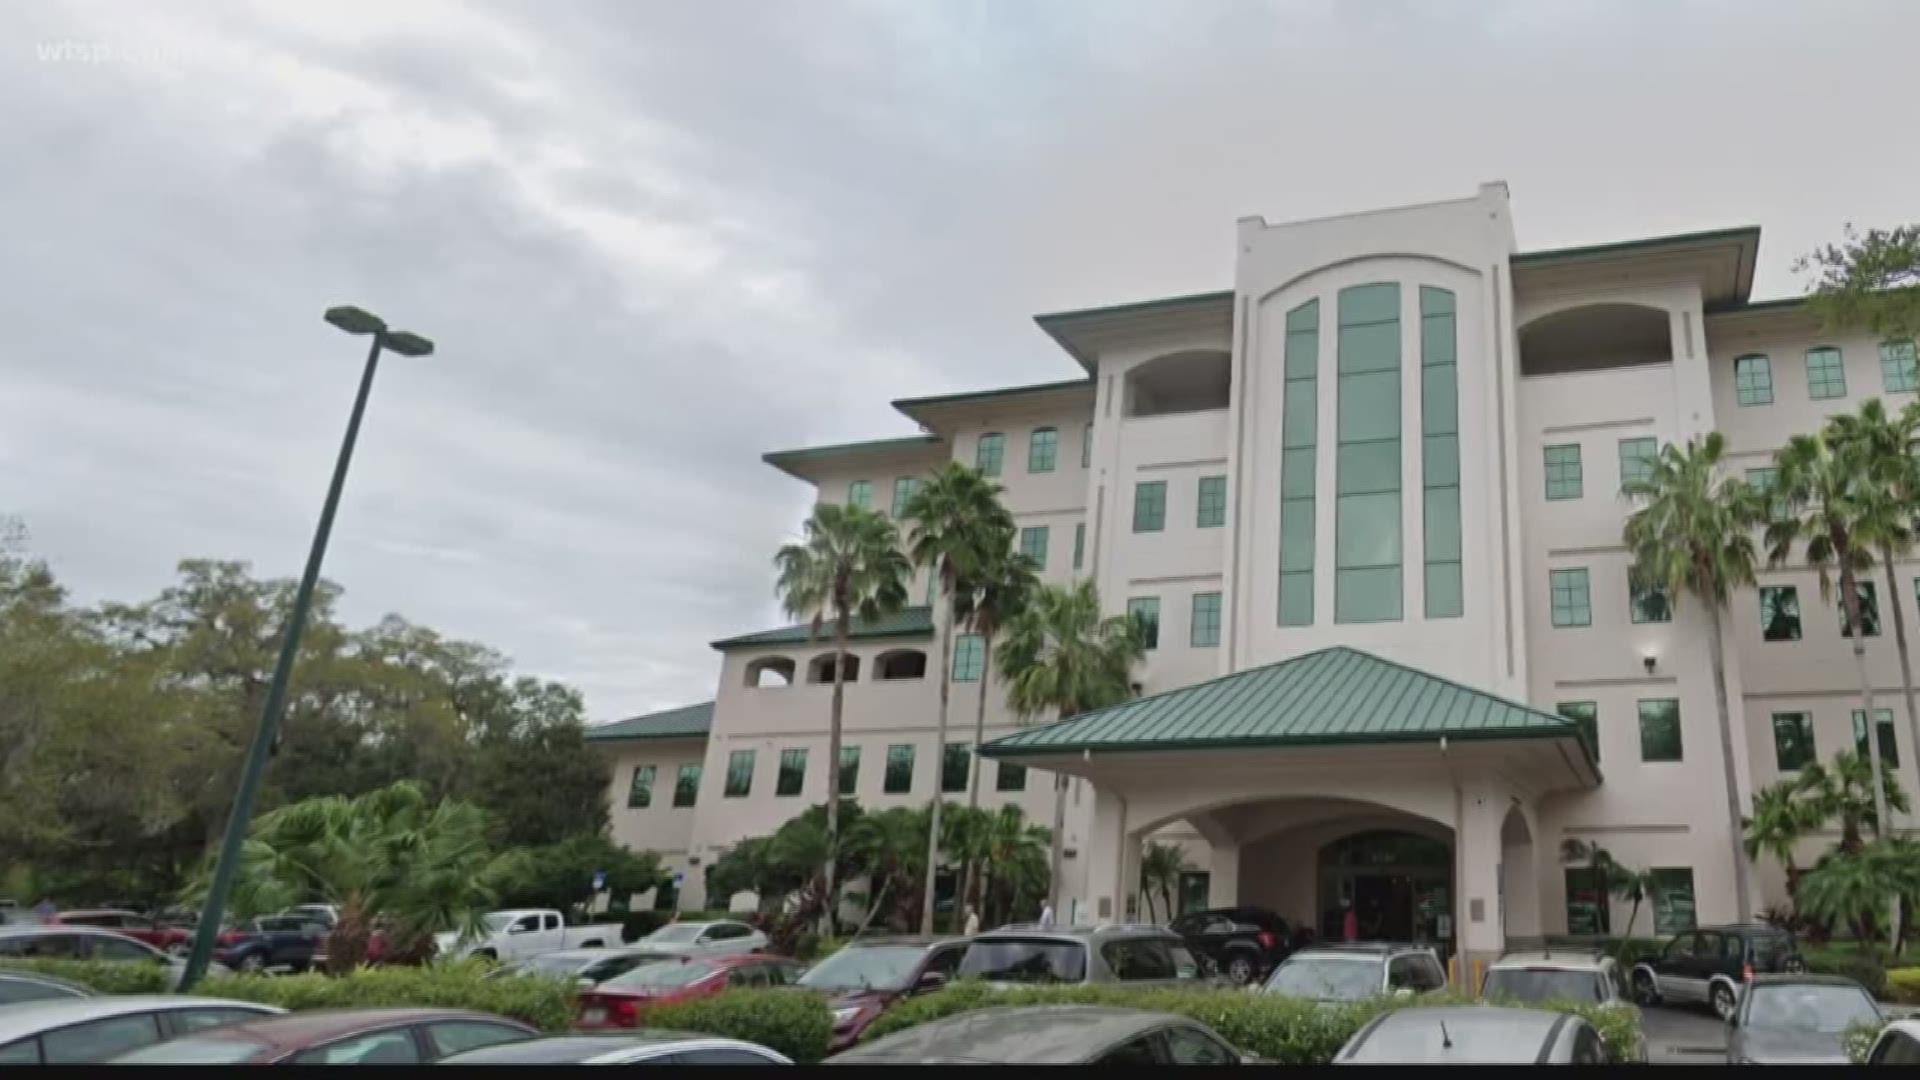 The person is a physician in the behavioral health unit at the hospital, according to Doctors Hospital of Sarasota.